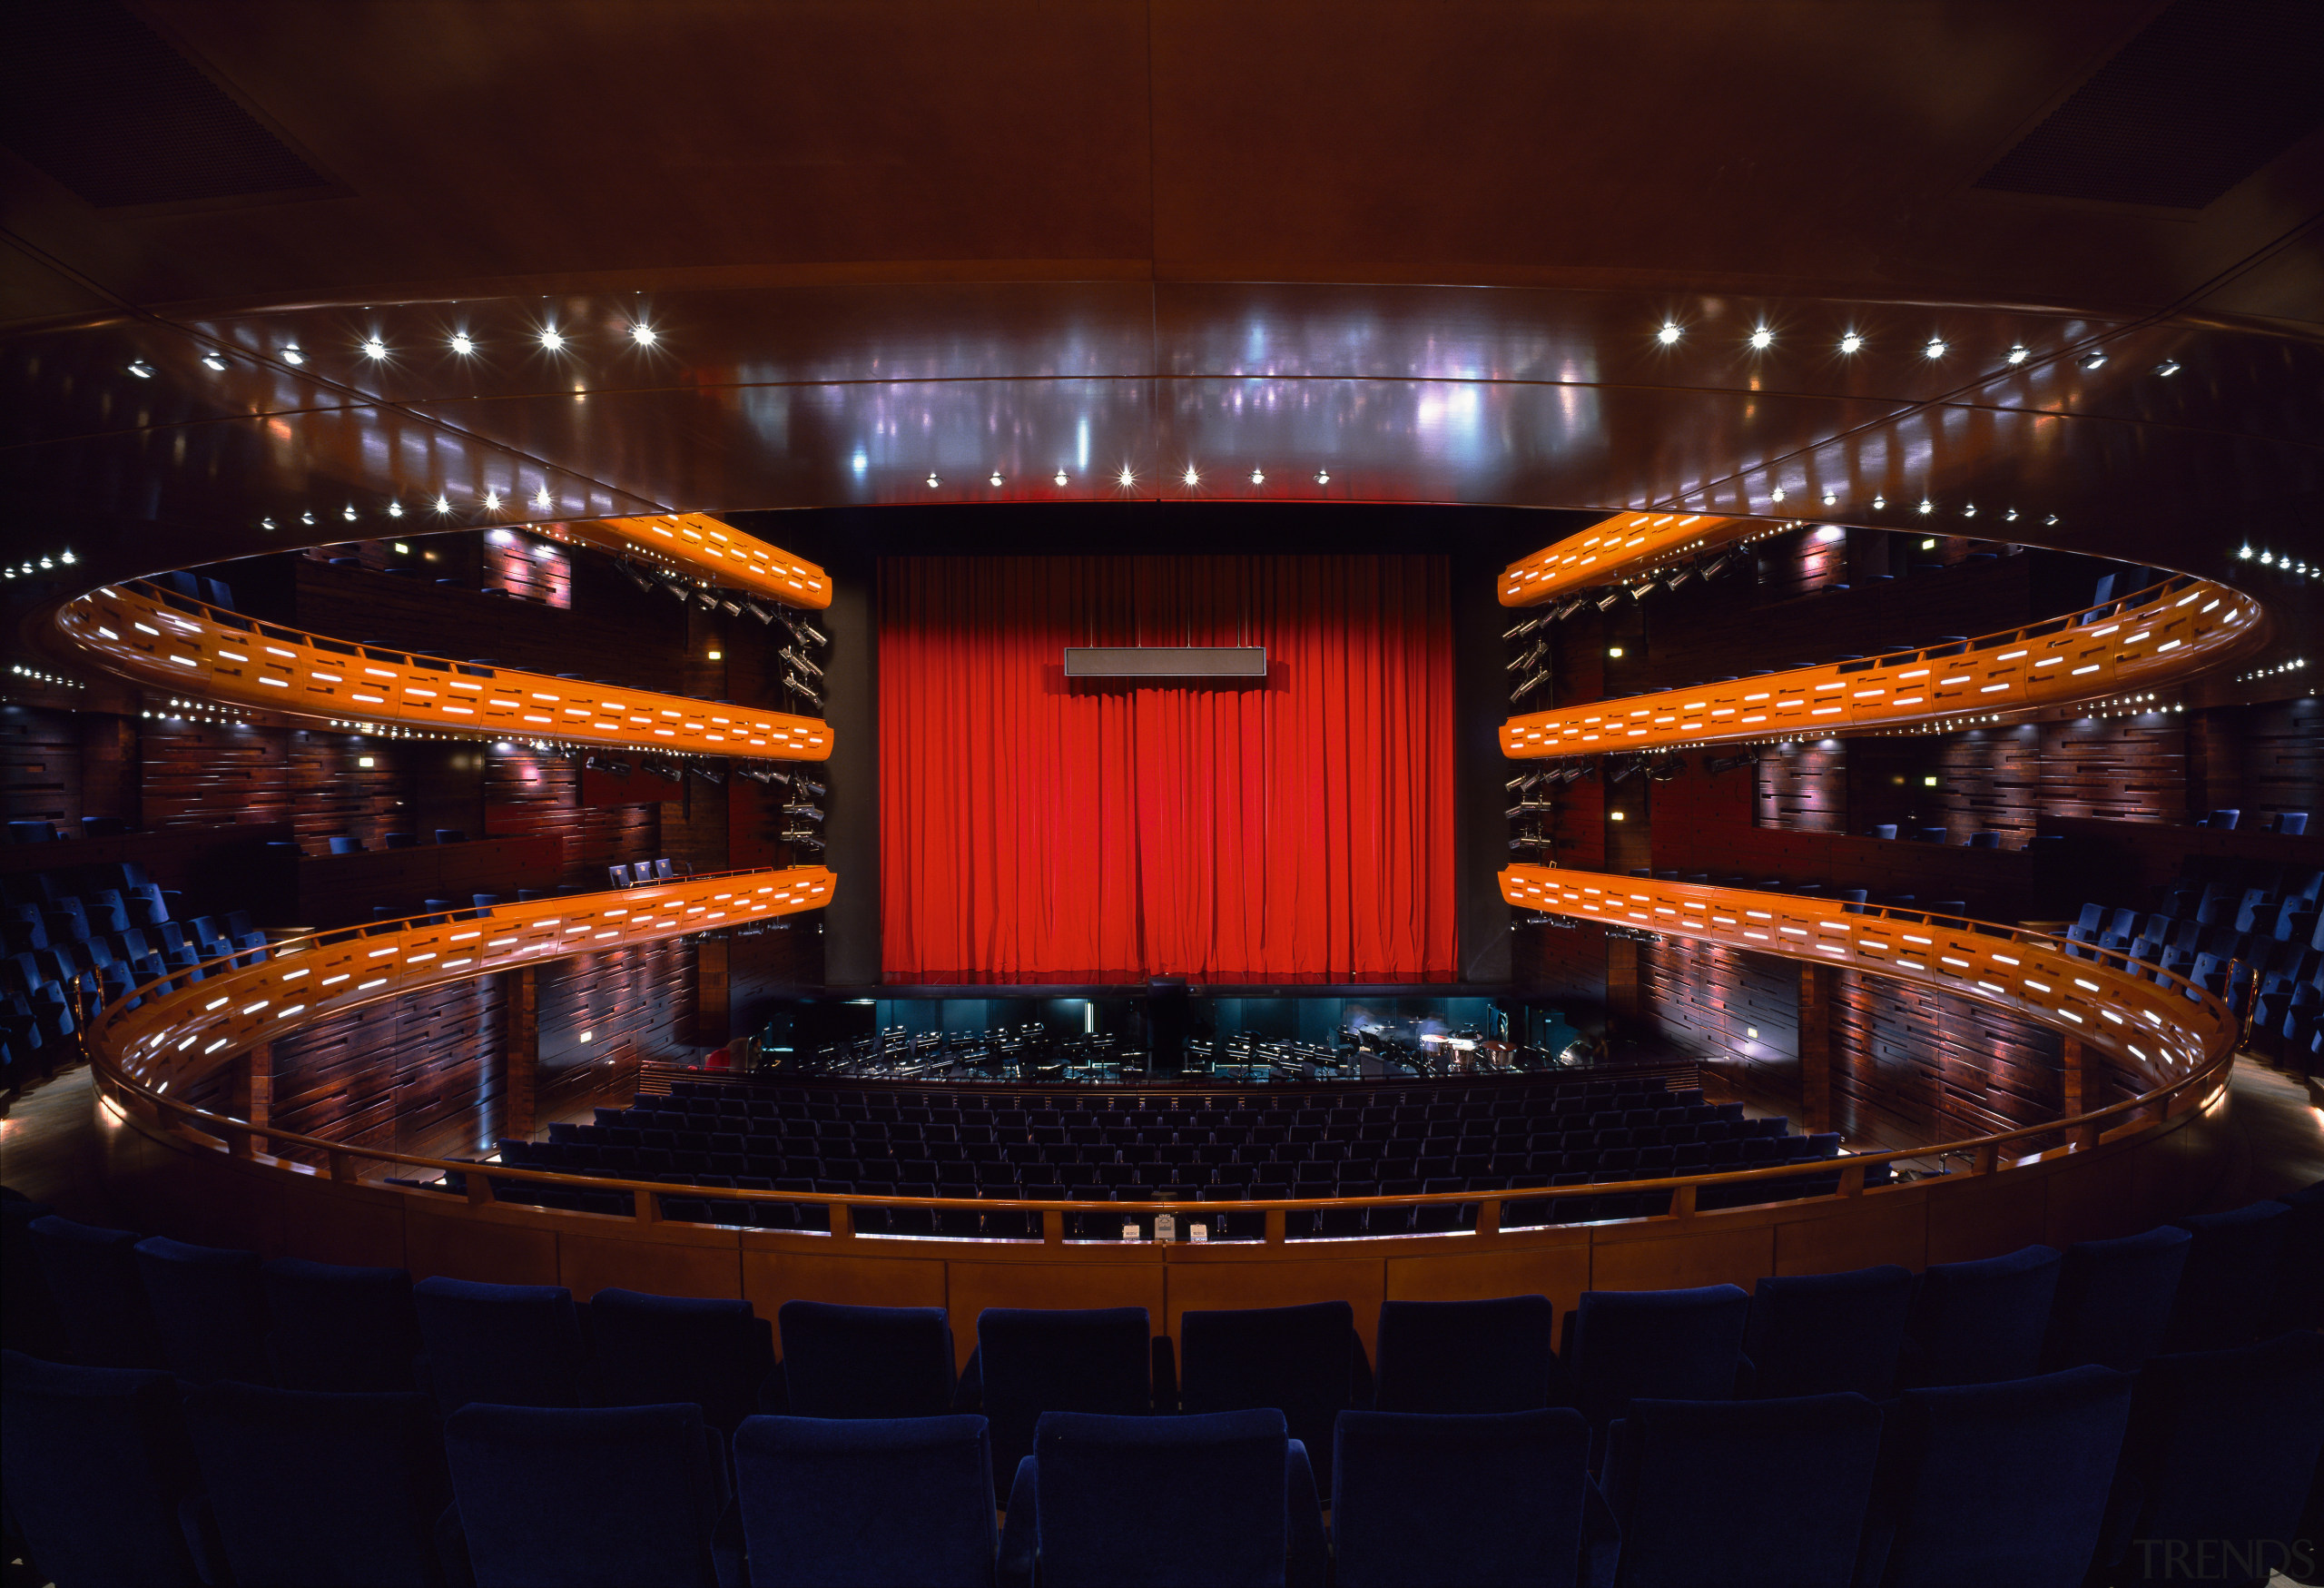 A view of the auditorium. - A view auditorium, concert hall, entertainment, lighting, night, performing arts center, stage, theatre, red, black